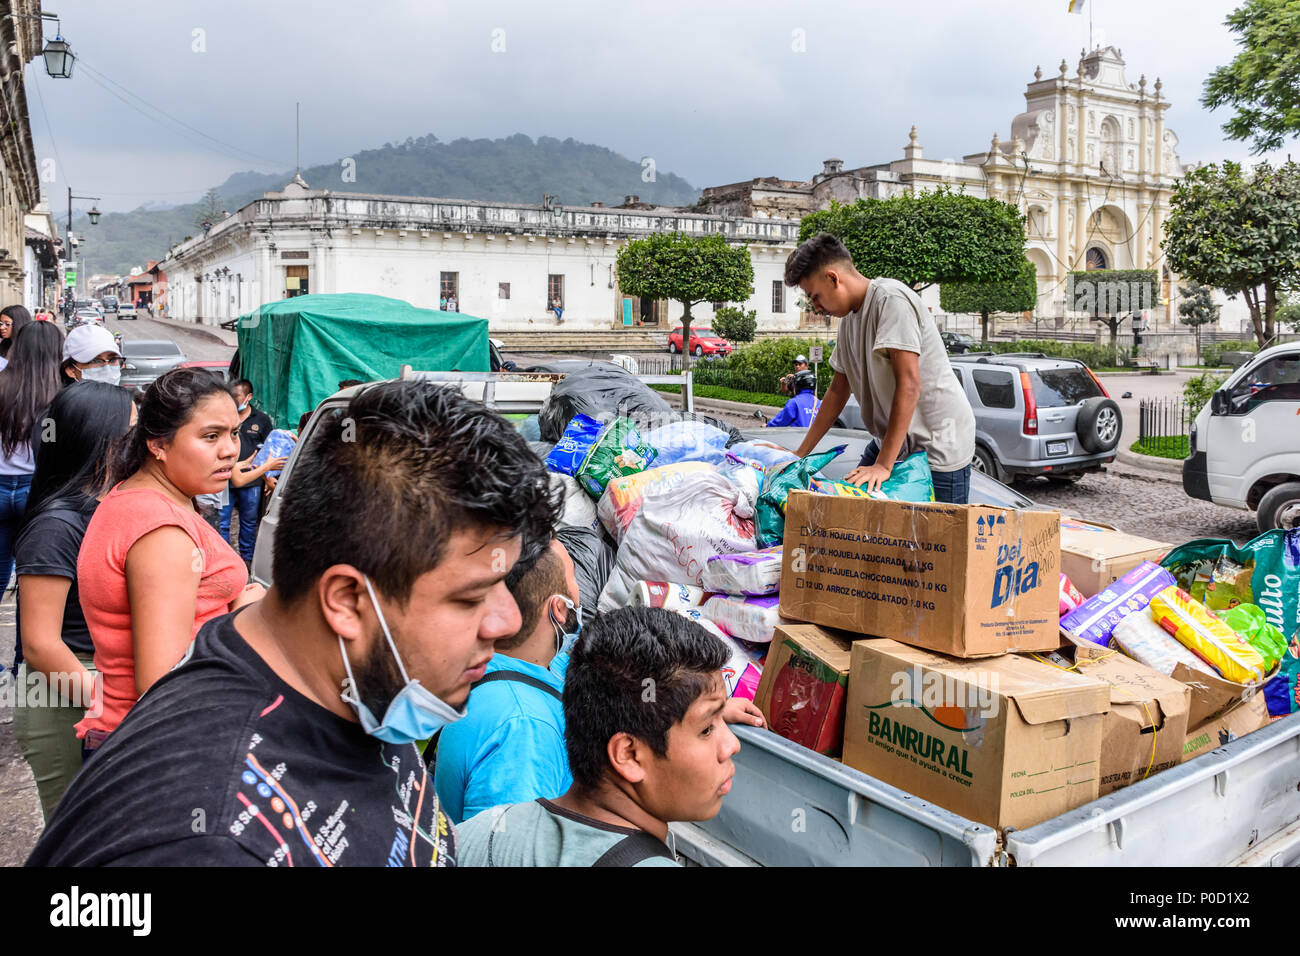 Antigua,, Guatemala -  June 5, 2018:  Volunteers load humanitarian aid supplies to take to area affected by eruption of Fuego (fire) volcano on June 3 Stock Photo